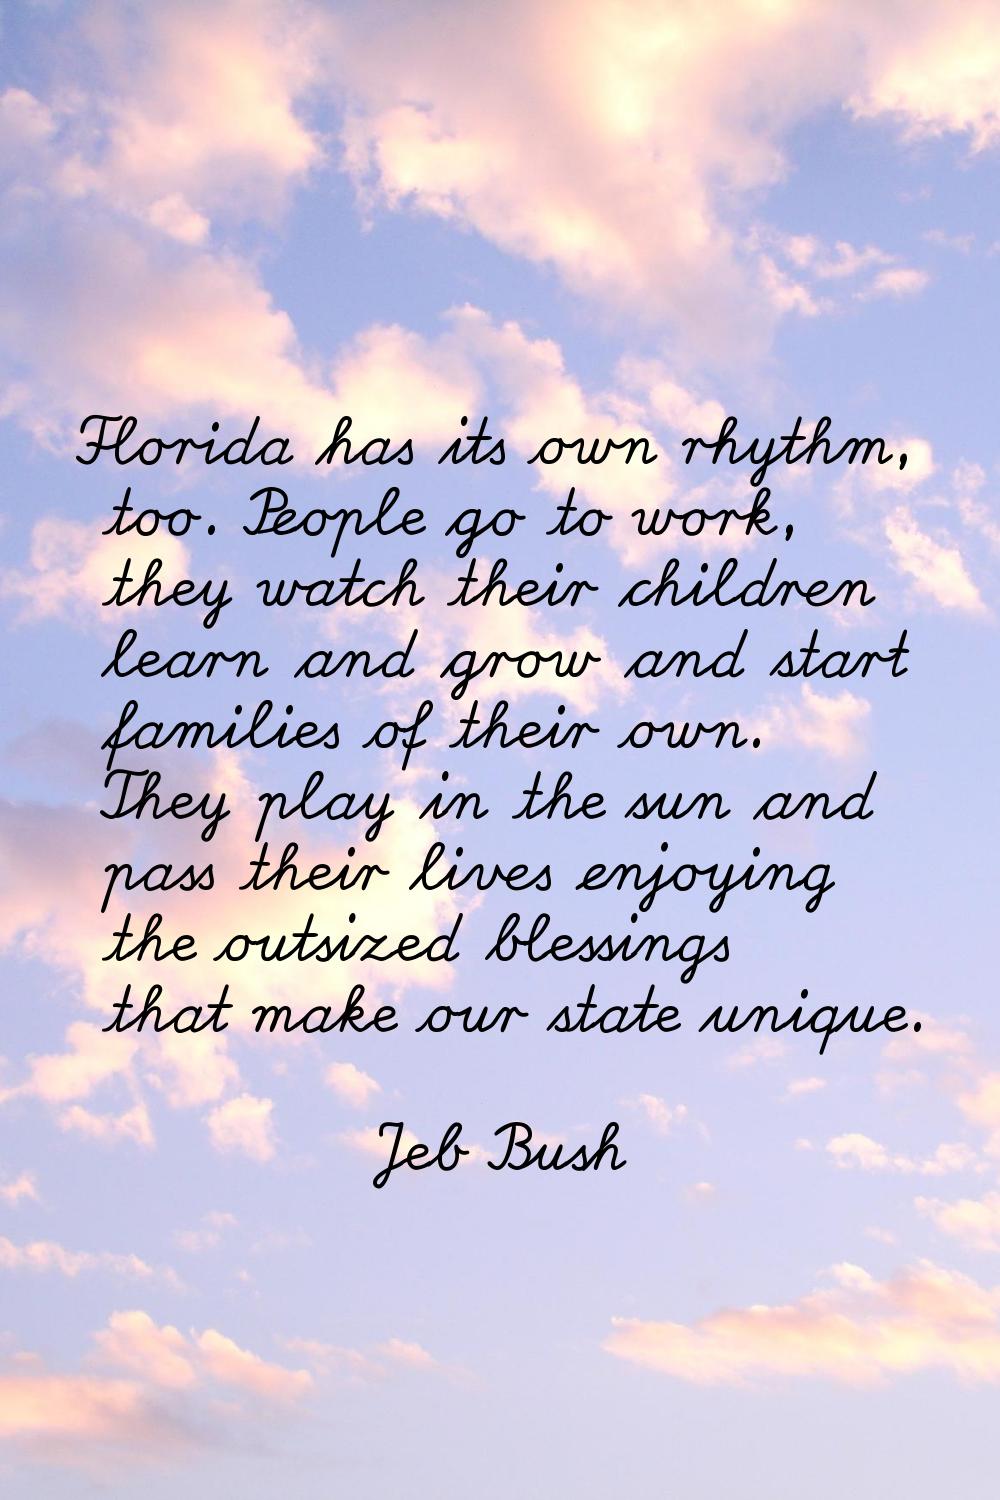 Florida has its own rhythm, too. People go to work, they watch their children learn and grow and st